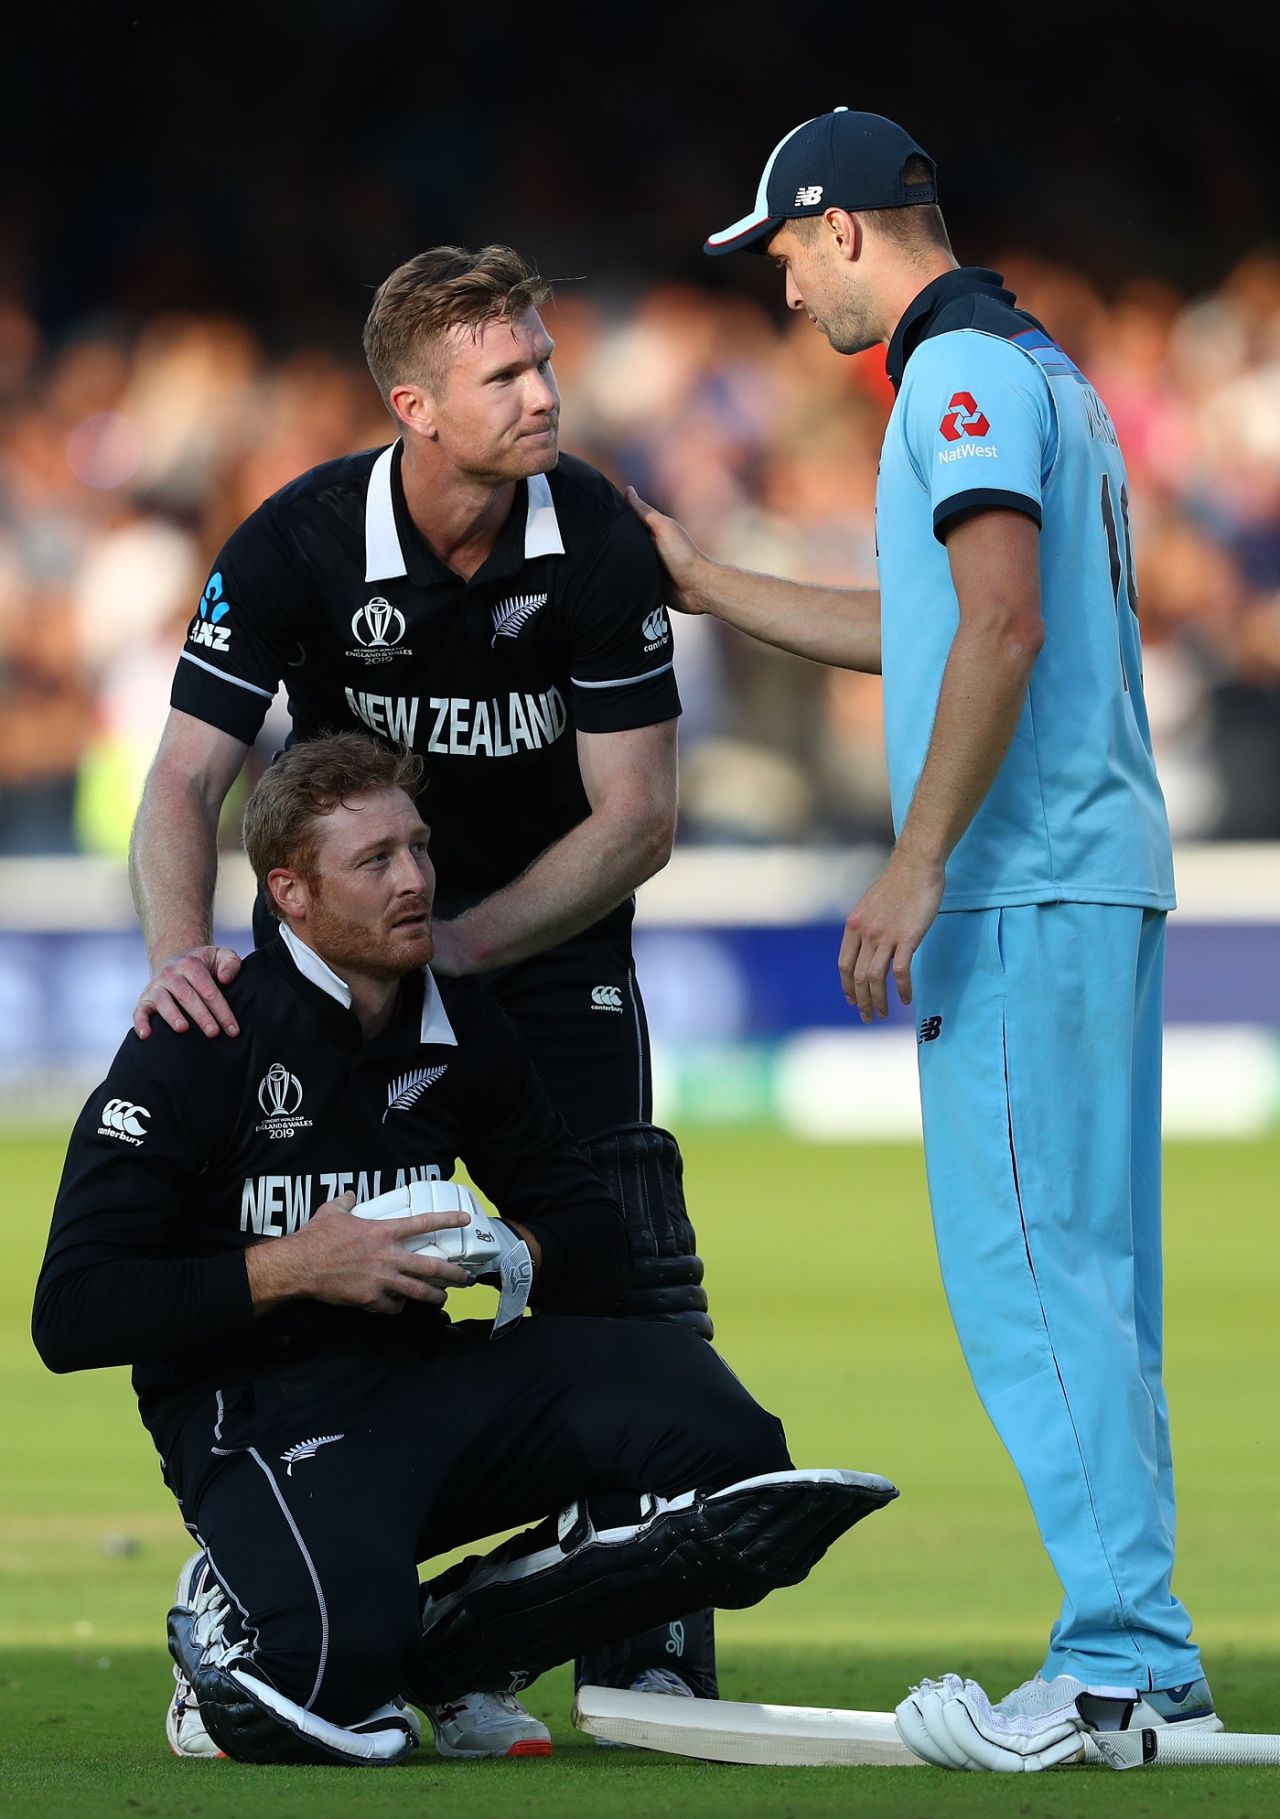 Chris Woakes consoles Jimmy Neesham and Martin Guptill after England sealed a thrilling Super Over, England v New Zealand, World Cup 2019 final, Lord's, July 14, 2019